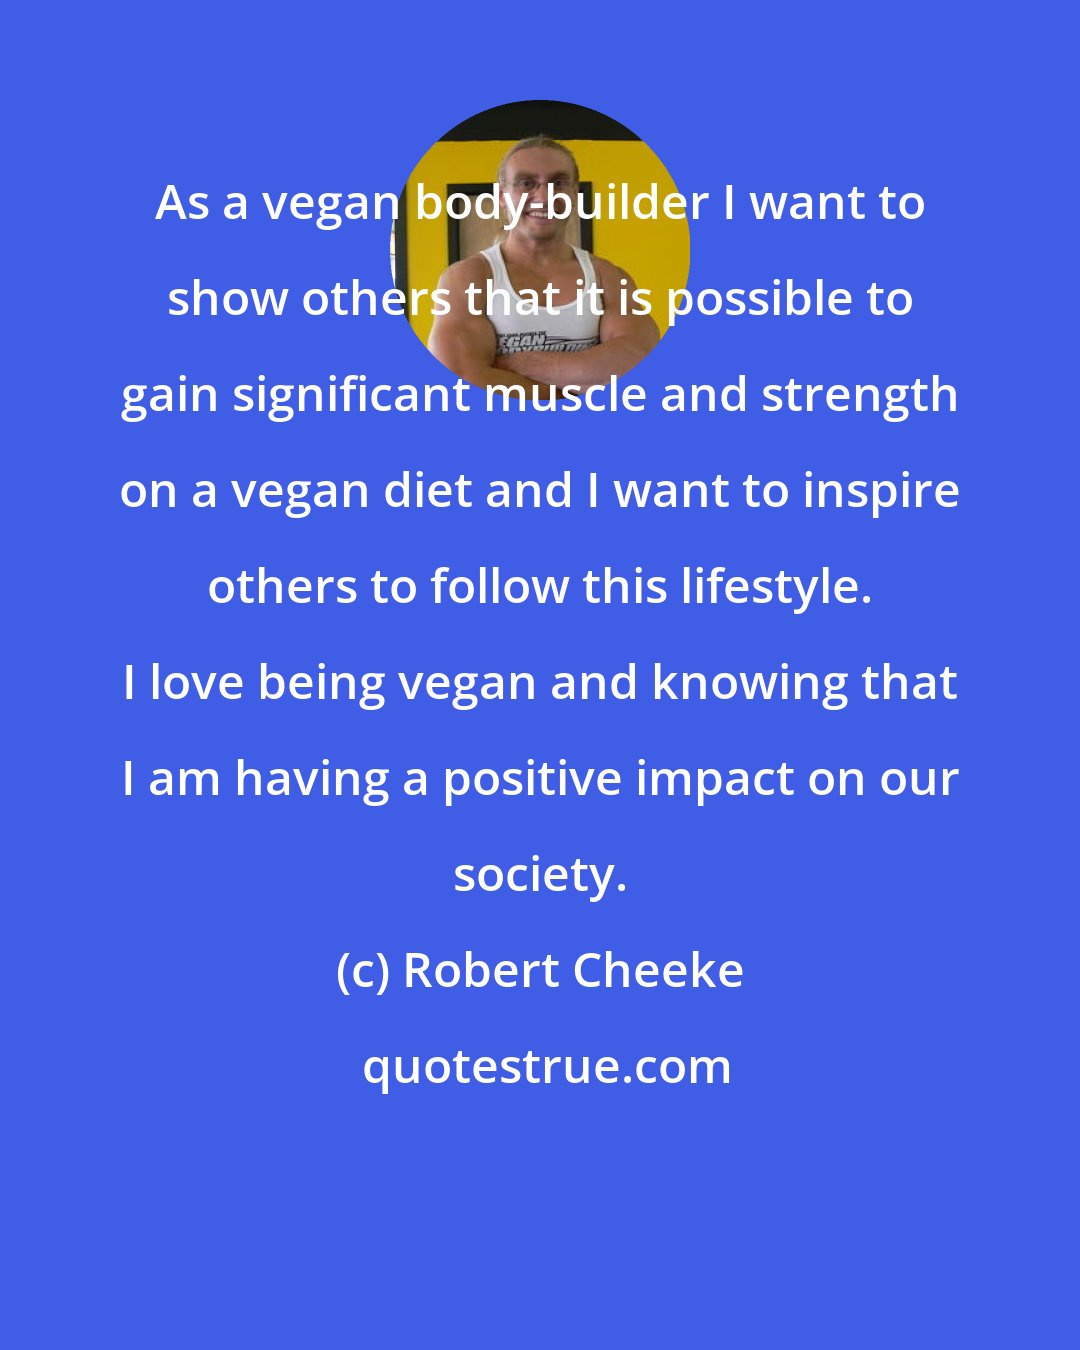 Robert Cheeke: As a vegan body-builder I want to show others that it is possible to gain significant muscle and strength on a vegan diet and I want to inspire others to follow this lifestyle. I love being vegan and knowing that I am having a positive impact on our society.